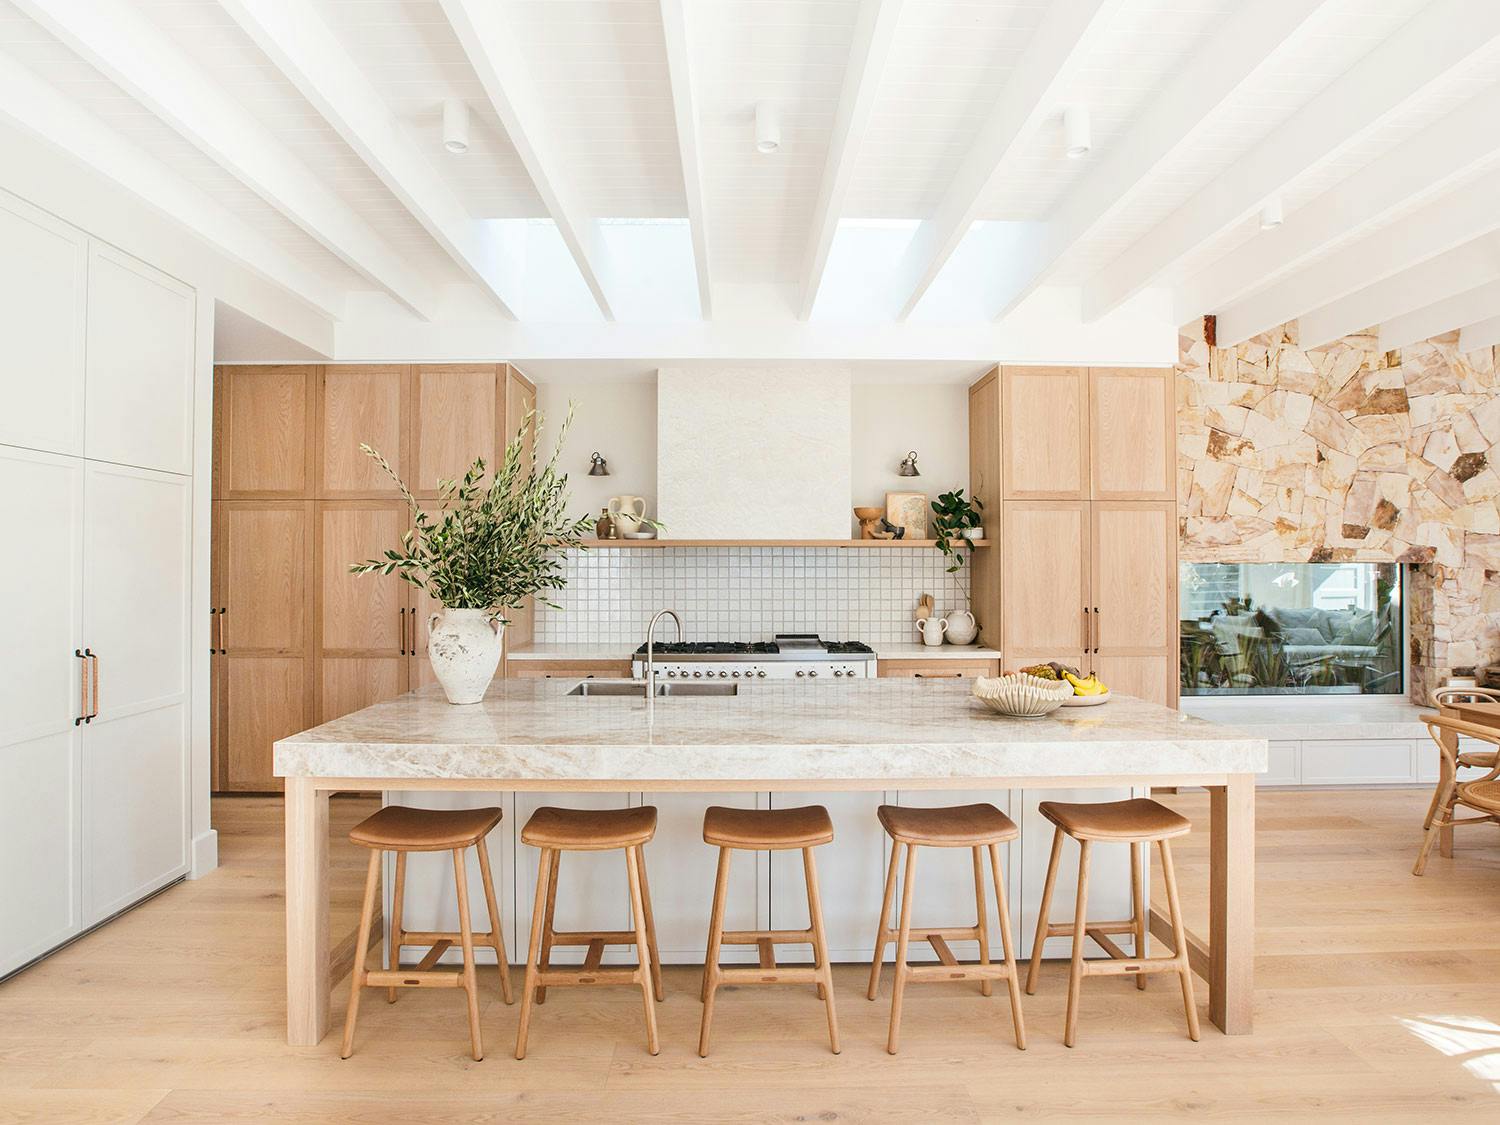 Add casual coastal chic to your cooking space with these 5 tips from renovation experts Kyal and Kara, inspired by their own kitchen design